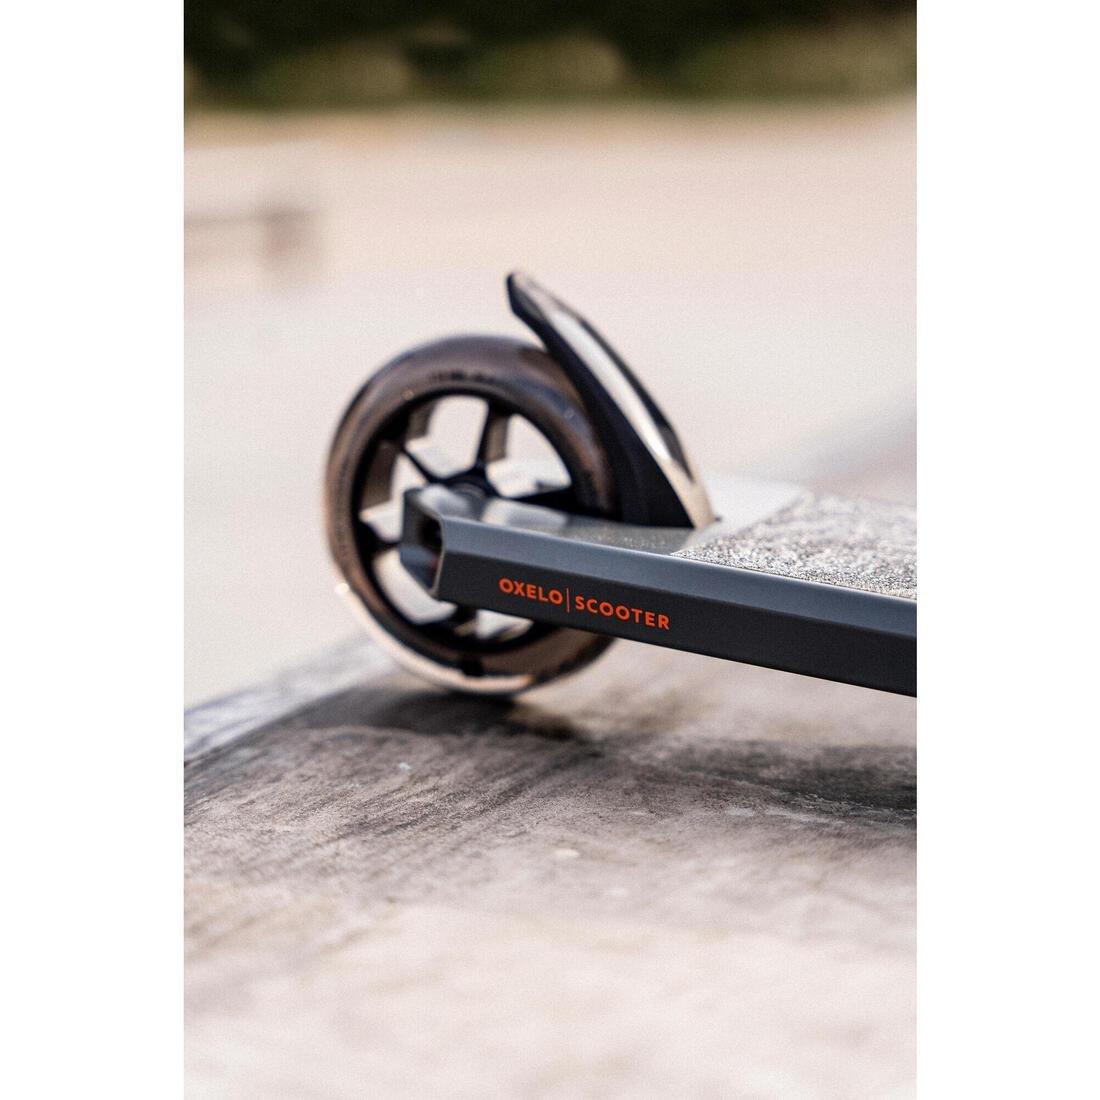 OXELO - Freestyle Scooter Mf520 - Burning, Grey